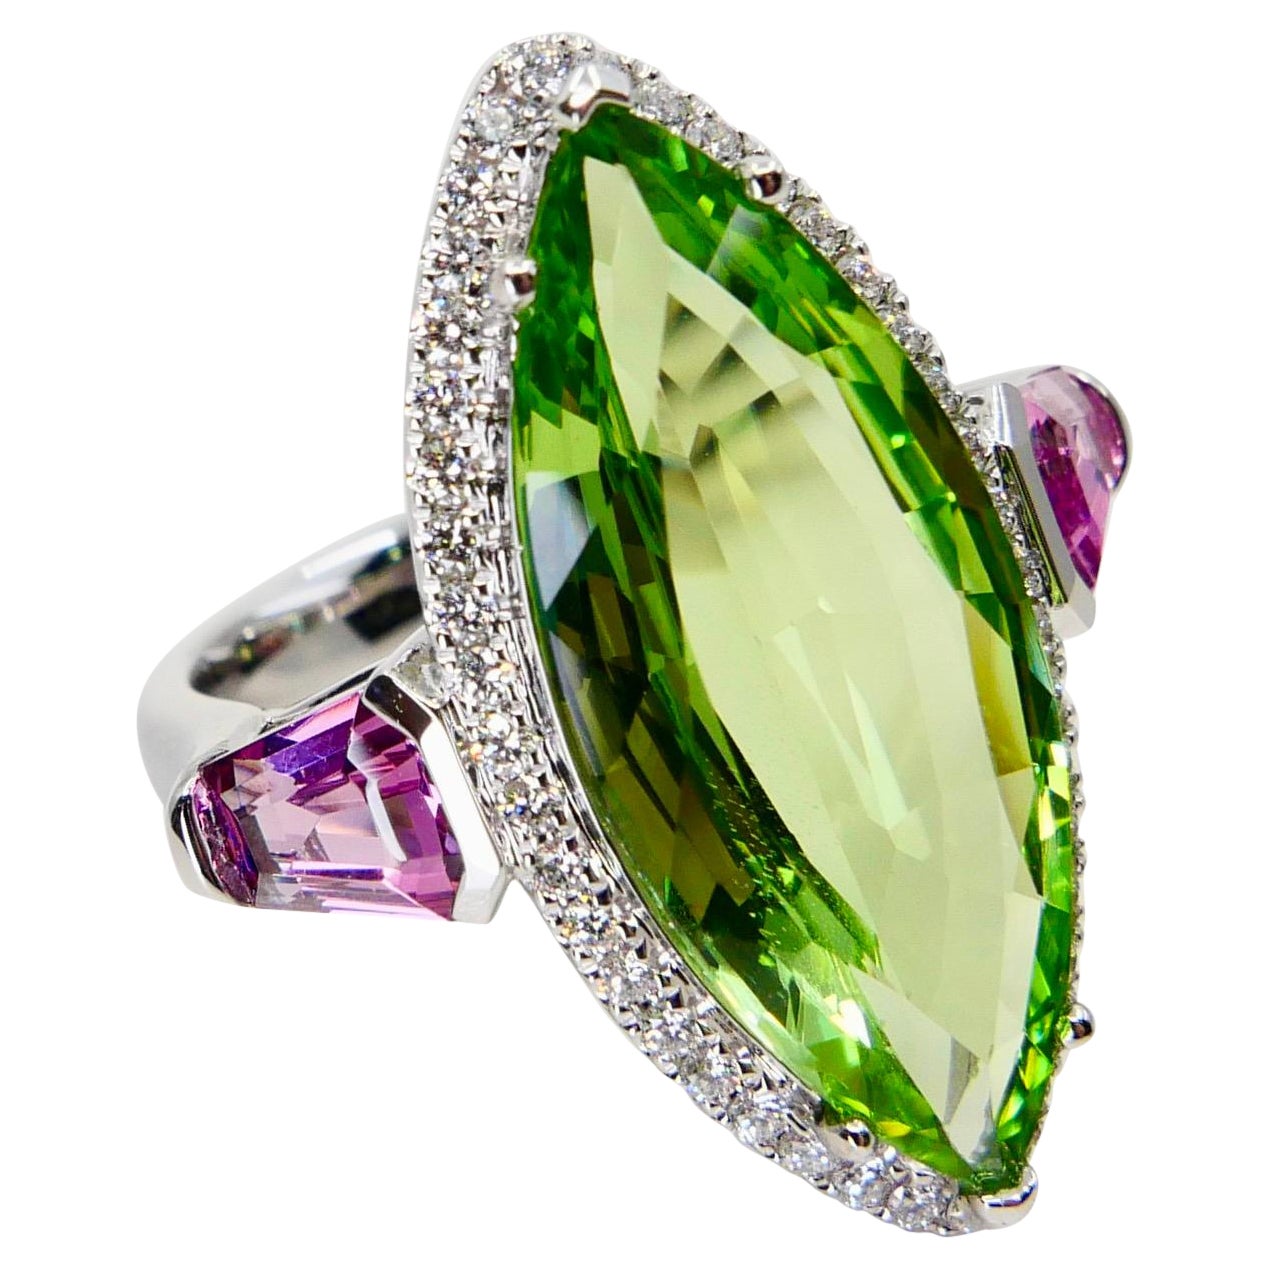 Natural Peridot 7.38 Cts, Pink Spinel & Diamond Cocktail Ring, Statement Piece